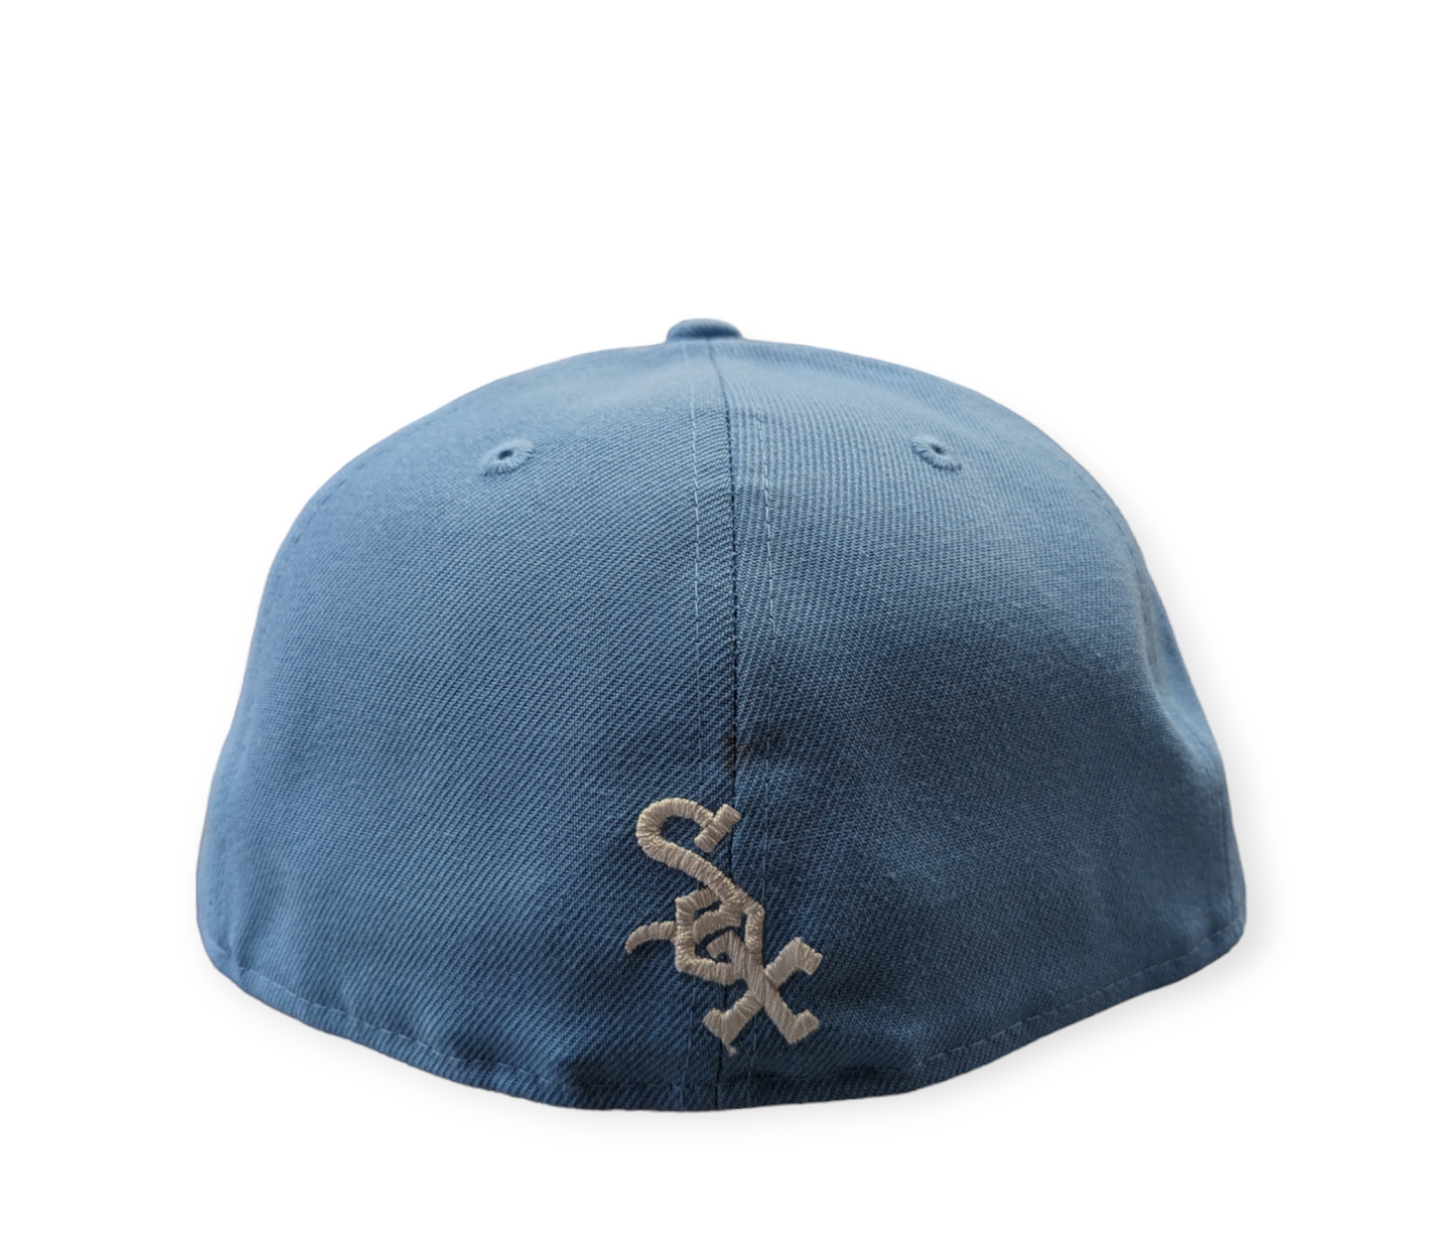 Chicago White Sox New Era Sky Blue Cooperstown Script 59FIFTY Fitted Hat